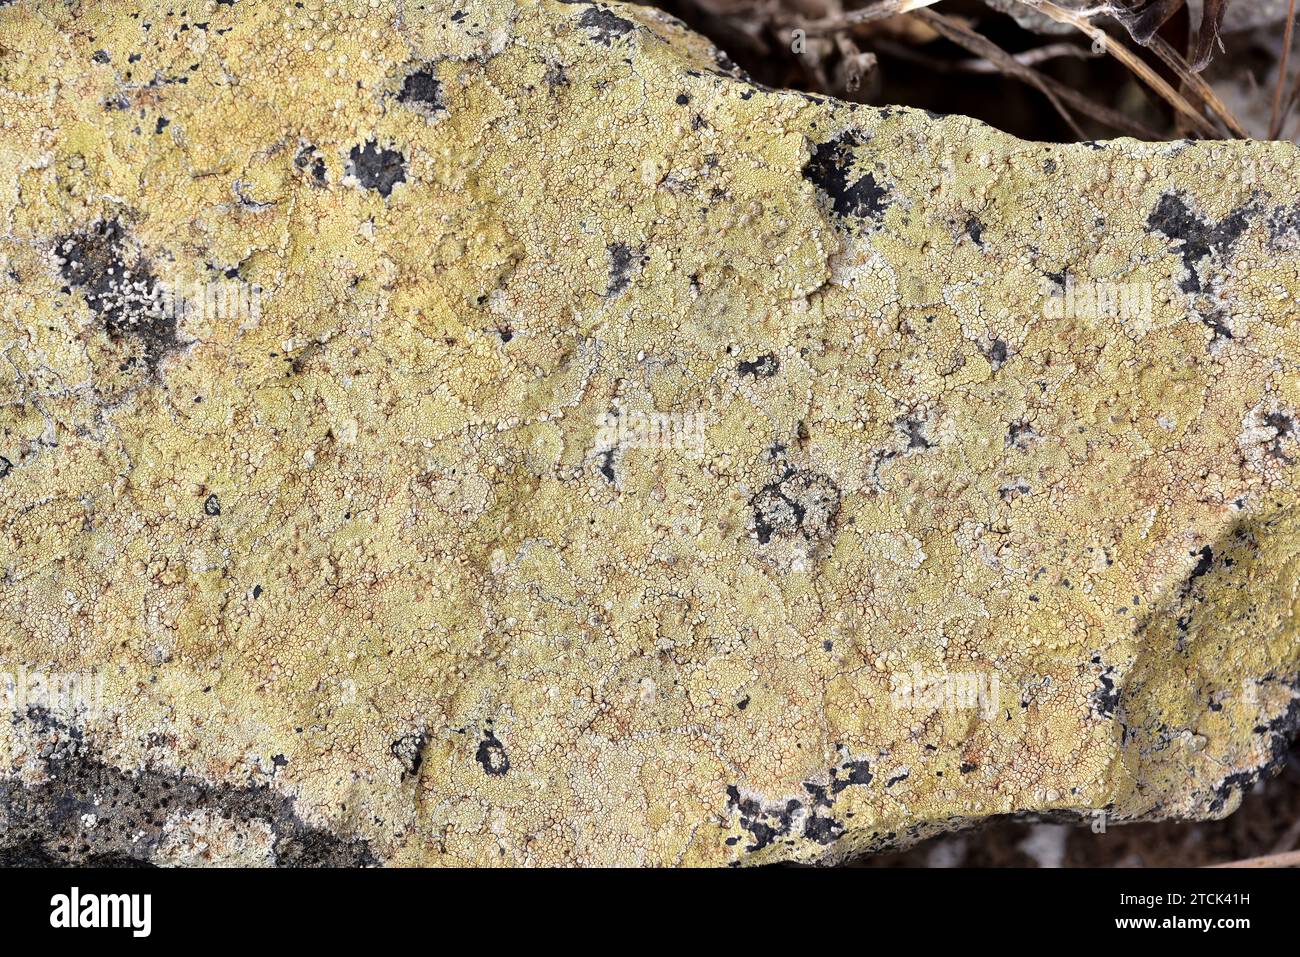 Pertusaria pluripuncta is a crustose lichen with apothecia. This photo was taken in Lanzarote Island, Canary Islands, Spain. Stock Photo